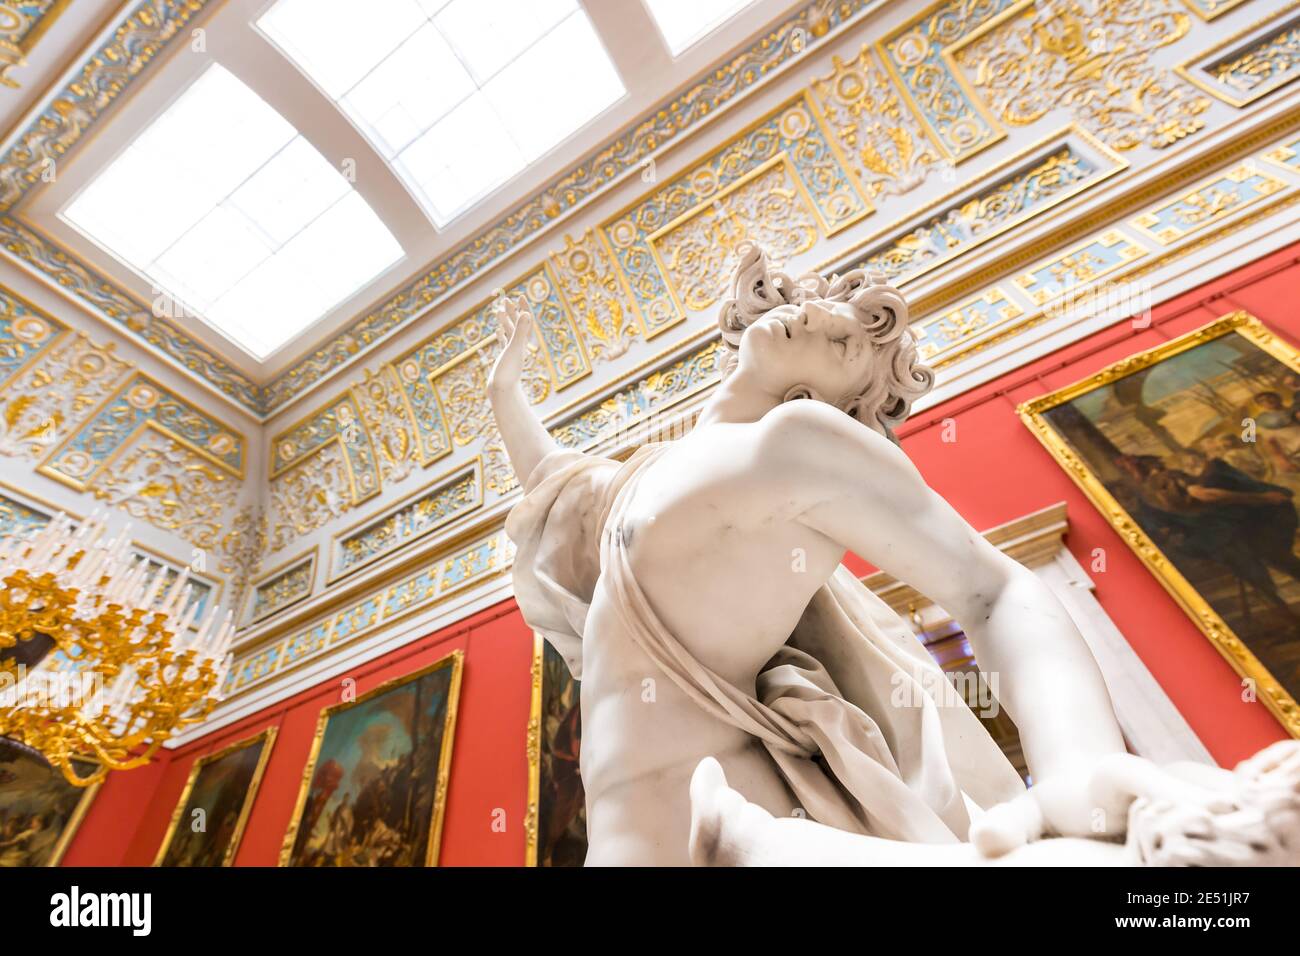 Close up of a mythological Italian statue displayed at the Ermitage museum in Saint Petersburg Stock Photo